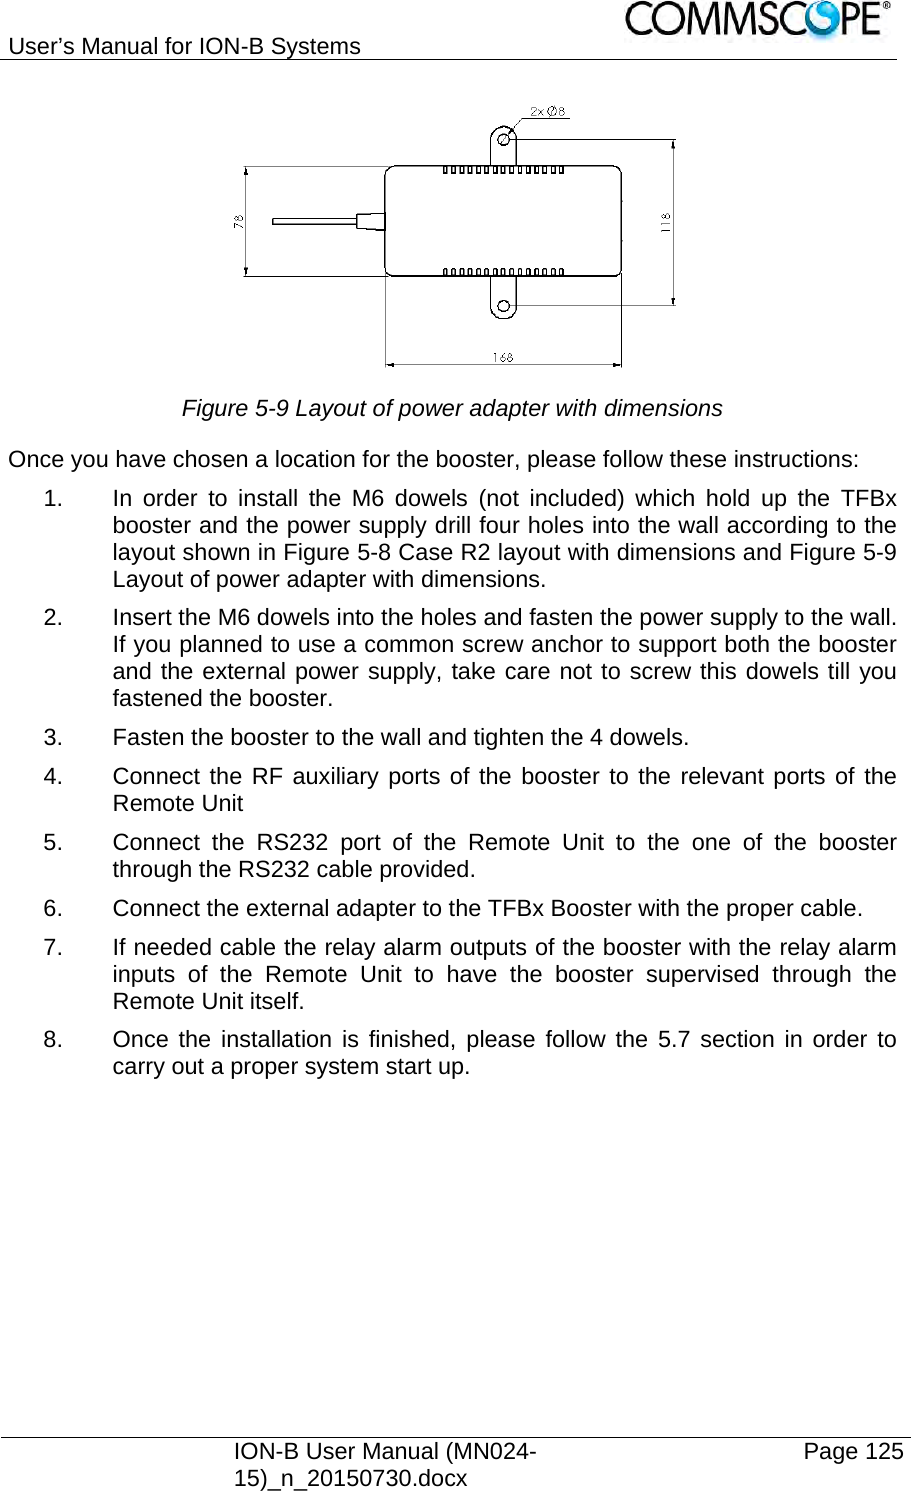 User’s Manual for ION-B Systems    ION-B User Manual (MN024-15)_n_20150730.docx  Page 125 Figure 5-9 Layout of power adapter with dimensions Once you have chosen a location for the booster, please follow these instructions: 1.  In order to install the M6 dowels (not included) which hold up the TFBx booster and the power supply drill four holes into the wall according to the layout shown in Figure 5-8 Case R2 layout with dimensions and Figure 5-9 Layout of power adapter with dimensions. 2.  Insert the M6 dowels into the holes and fasten the power supply to the wall. If you planned to use a common screw anchor to support both the booster and the external power supply, take care not to screw this dowels till you fastened the booster. 3.  Fasten the booster to the wall and tighten the 4 dowels. 4.  Connect the RF auxiliary ports of the booster to the relevant ports of the Remote Unit 5.  Connect the RS232 port of the Remote Unit to the one of the booster through the RS232 cable provided. 6.  Connect the external adapter to the TFBx Booster with the proper cable. 7.  If needed cable the relay alarm outputs of the booster with the relay alarm inputs of the Remote Unit to have the booster supervised through the Remote Unit itself. 8.  Once the installation is finished, please follow the 5.7 section in order to carry out a proper system start up. 